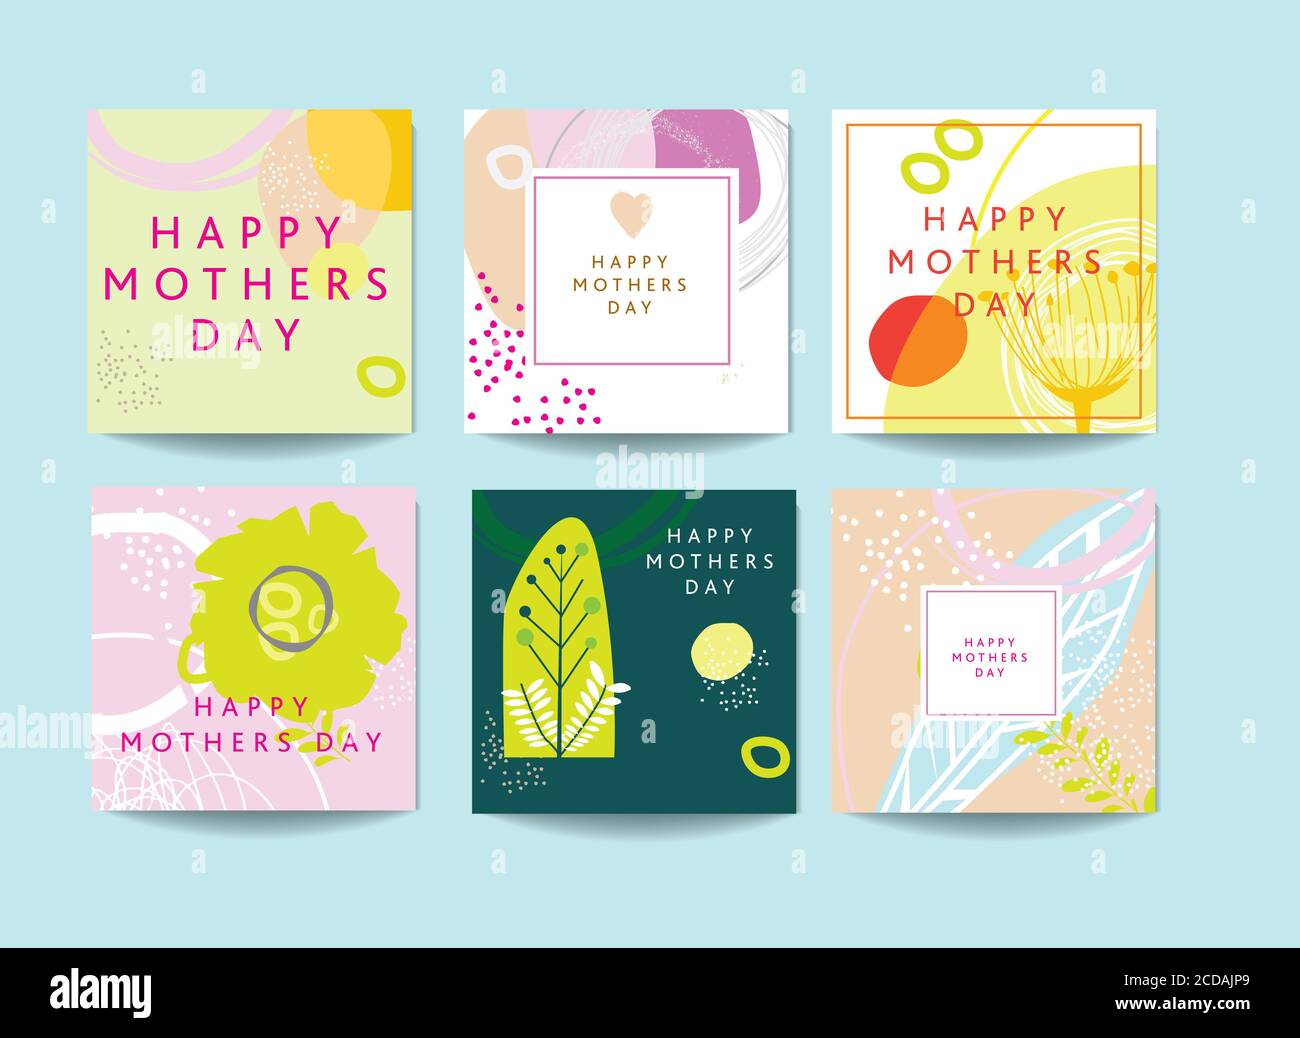 Modern abstract floral based scandinavian abstract art inspired cards for mothers day with floral and geometric elements, set of 6. Stock Photo